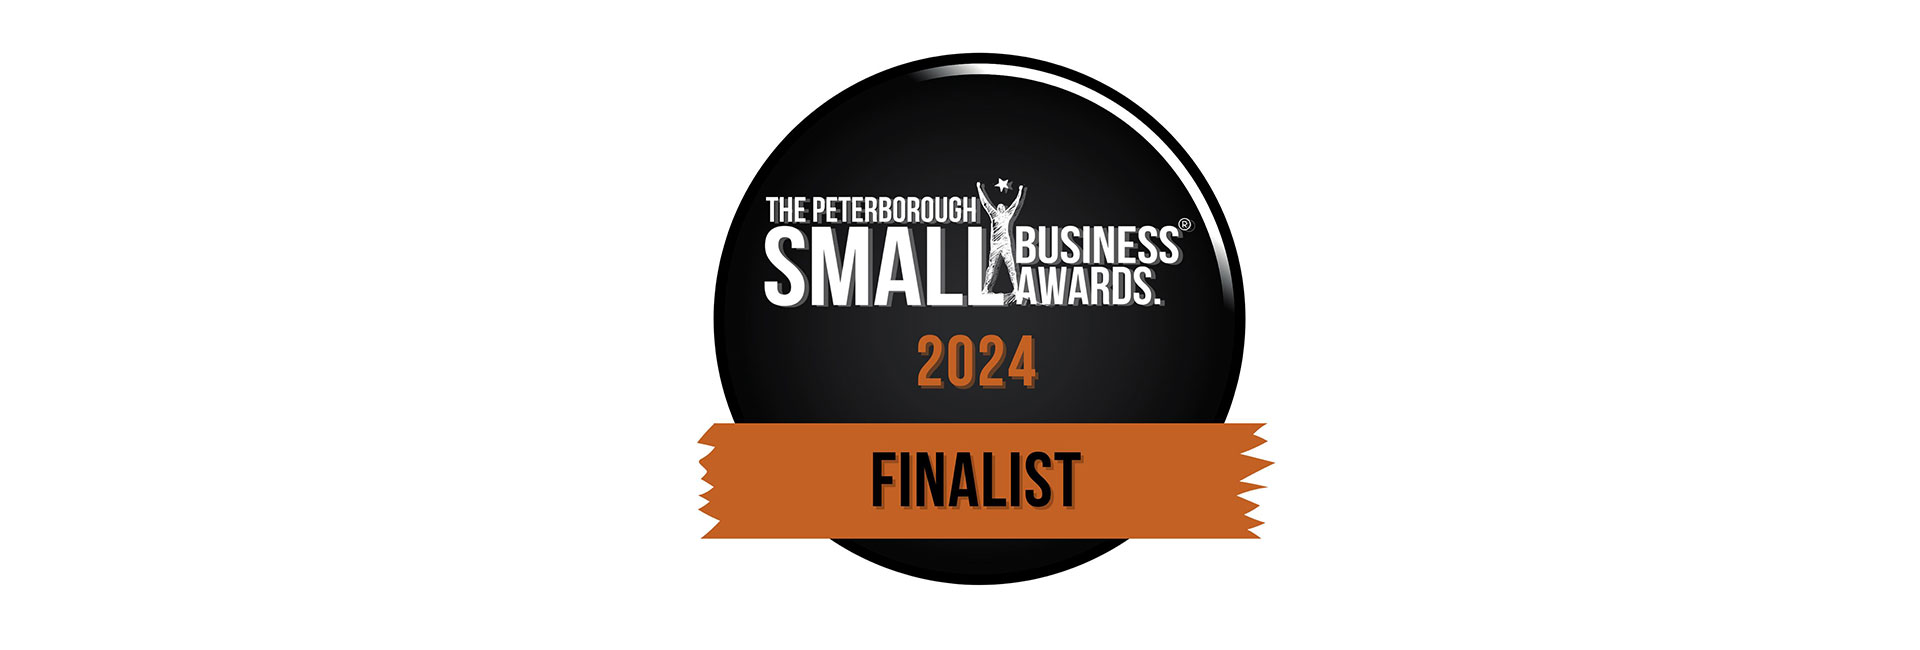 Melanie Richard’s Are Finalists In The Peterborough Small Business Awards